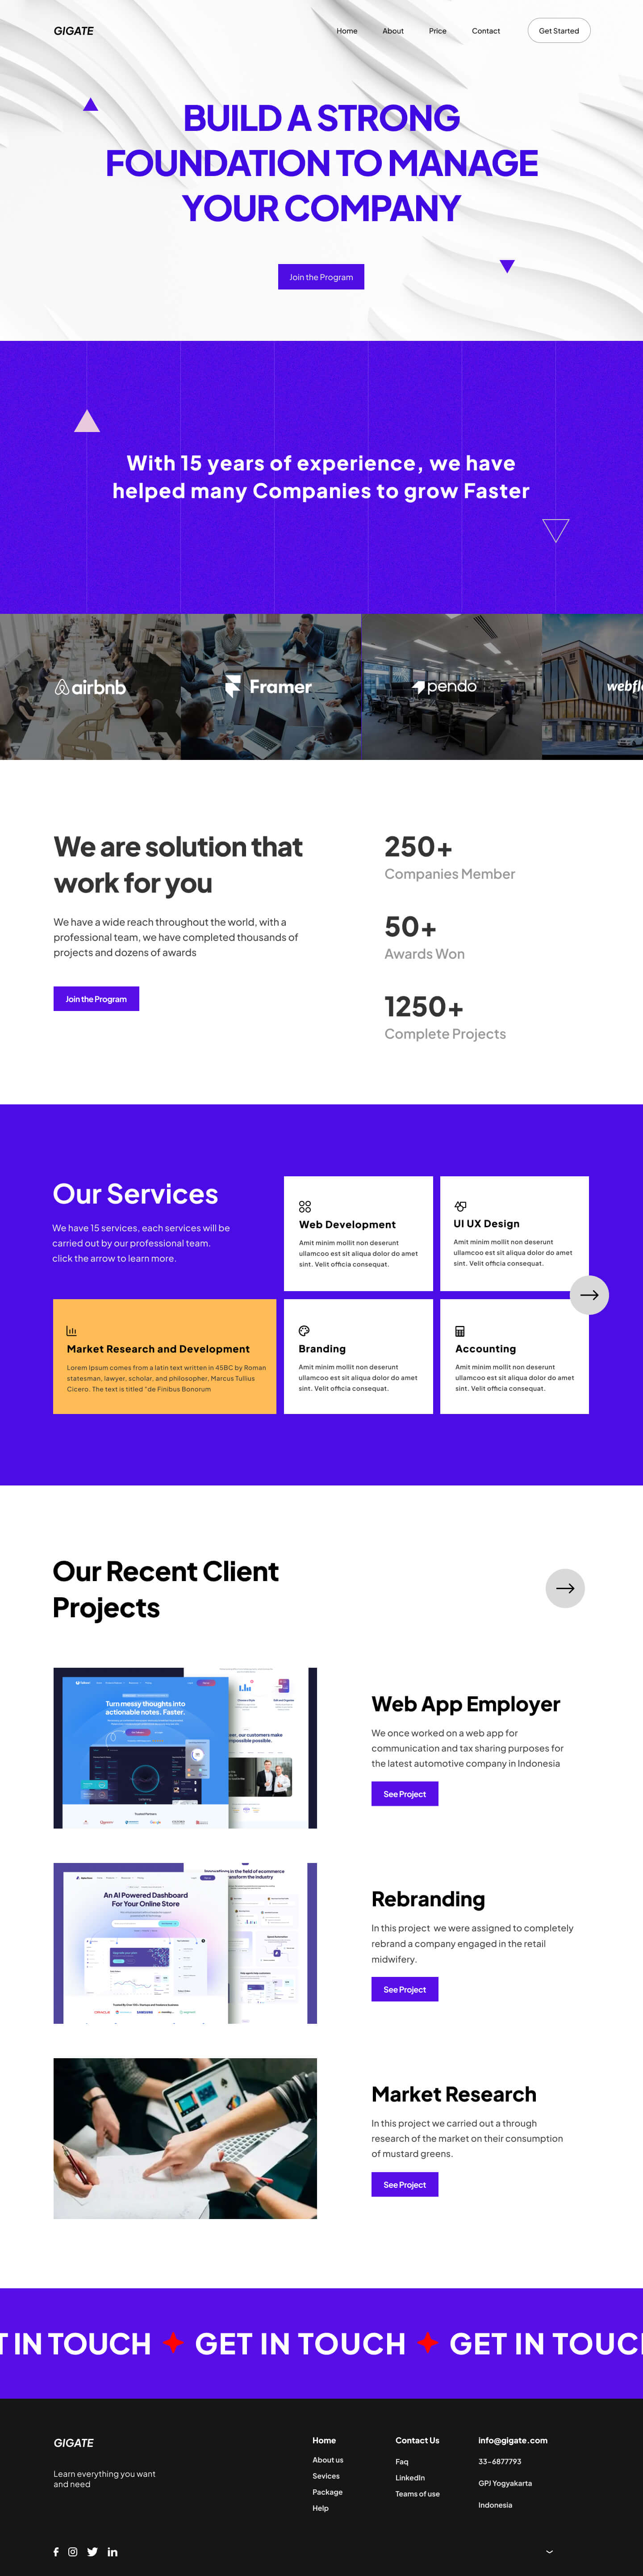 Full Preview of GiGate - Agency Website Design Full Page